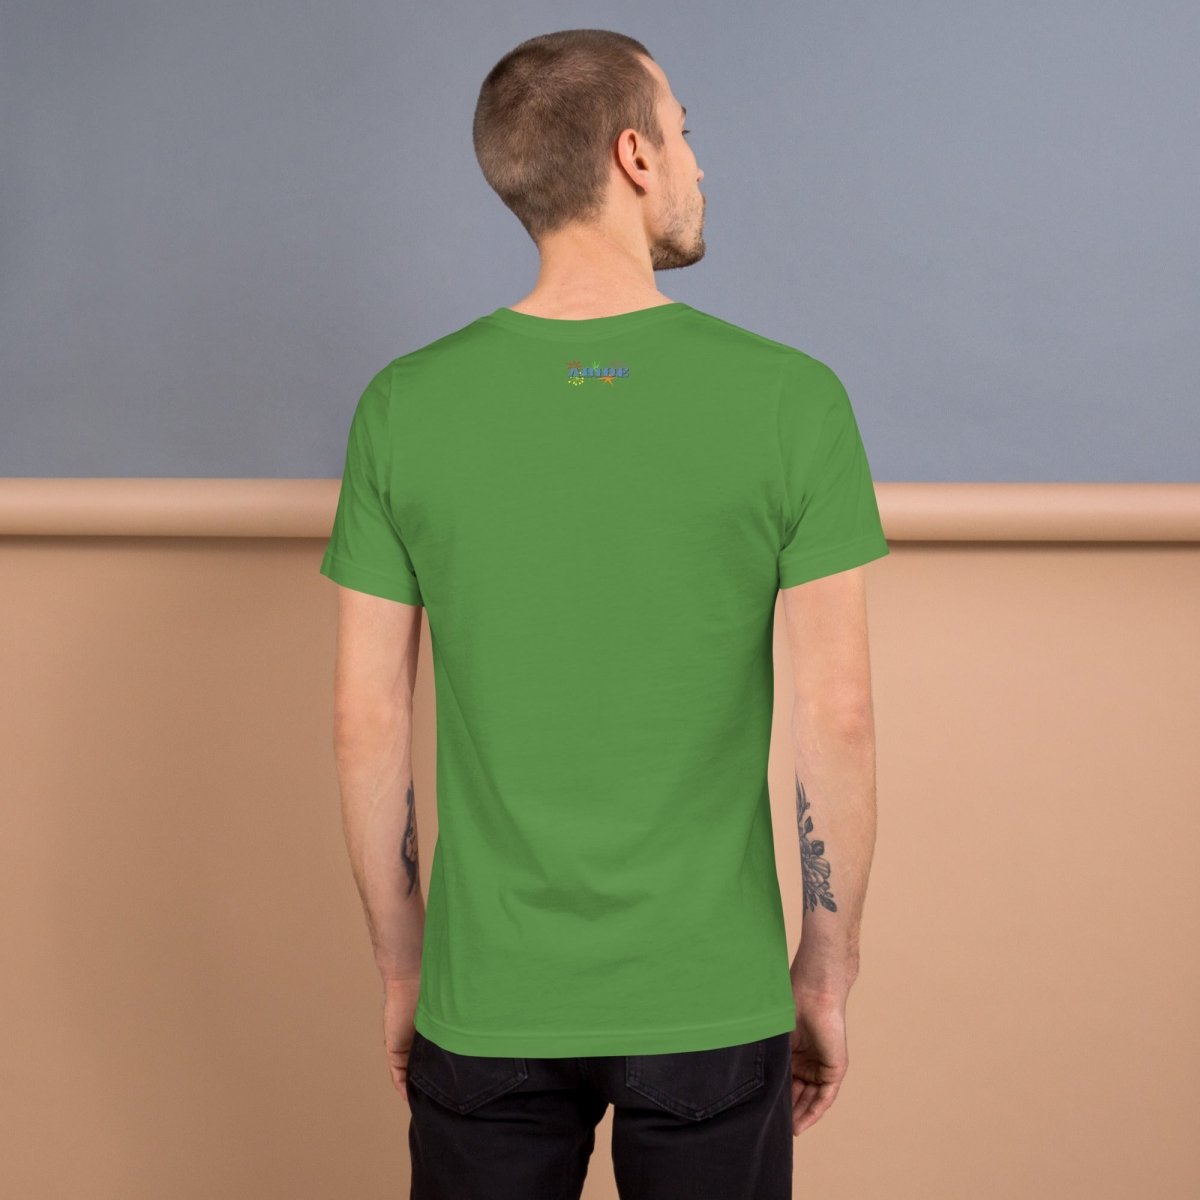 Dad Noises- Dadisms - Don't Make Me Pull This Car Over Kelly Green Unisex t-shirt back view - The Dude Abides - Birthday